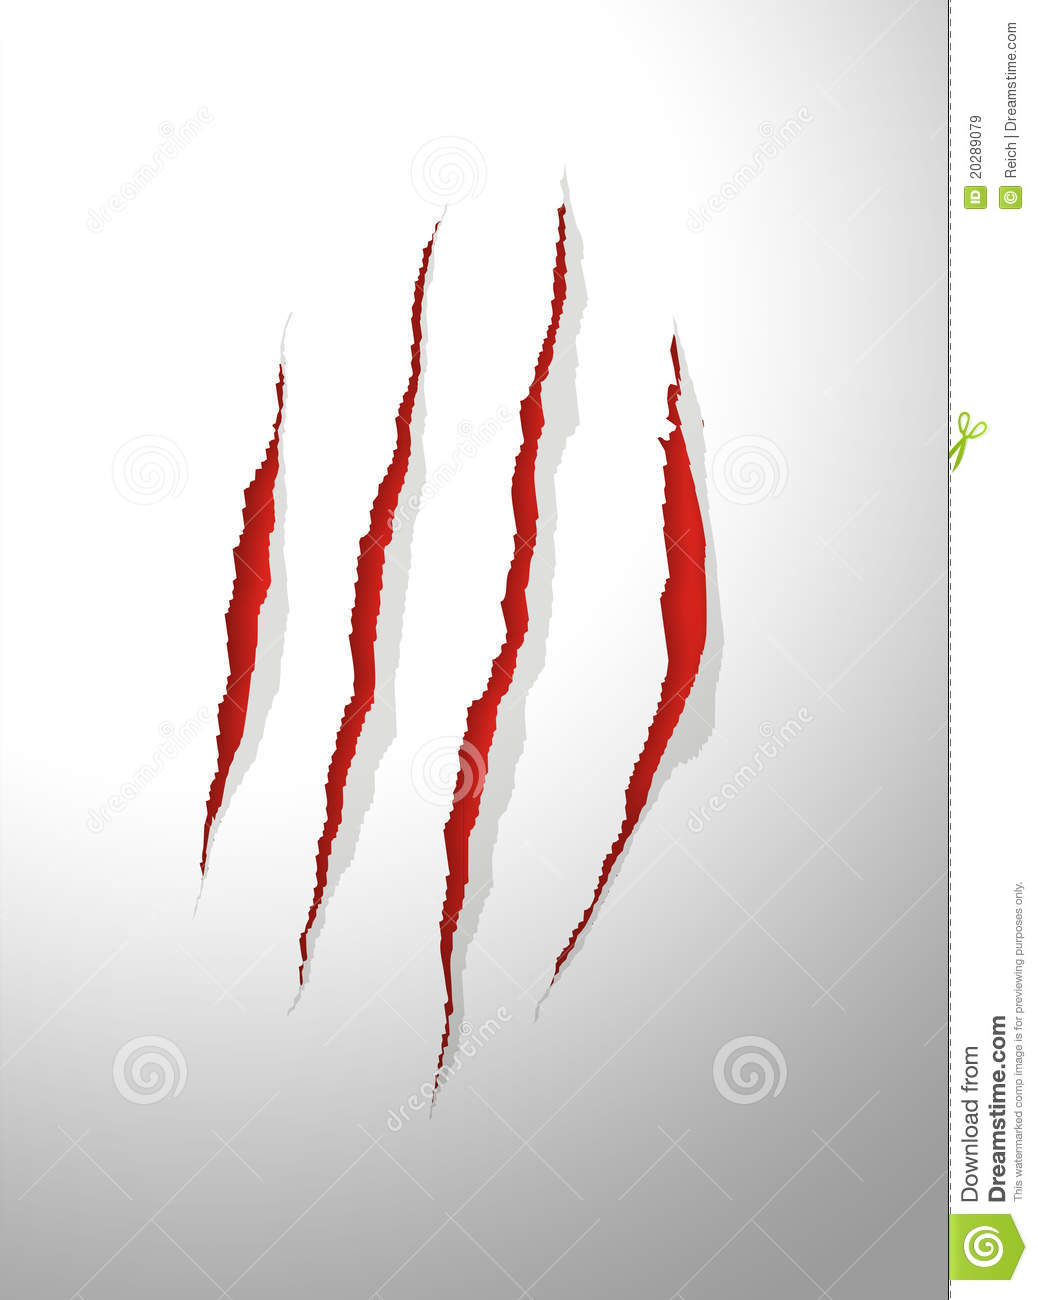 Claws Scratches Royalty Free Stock Images   Image  20289079